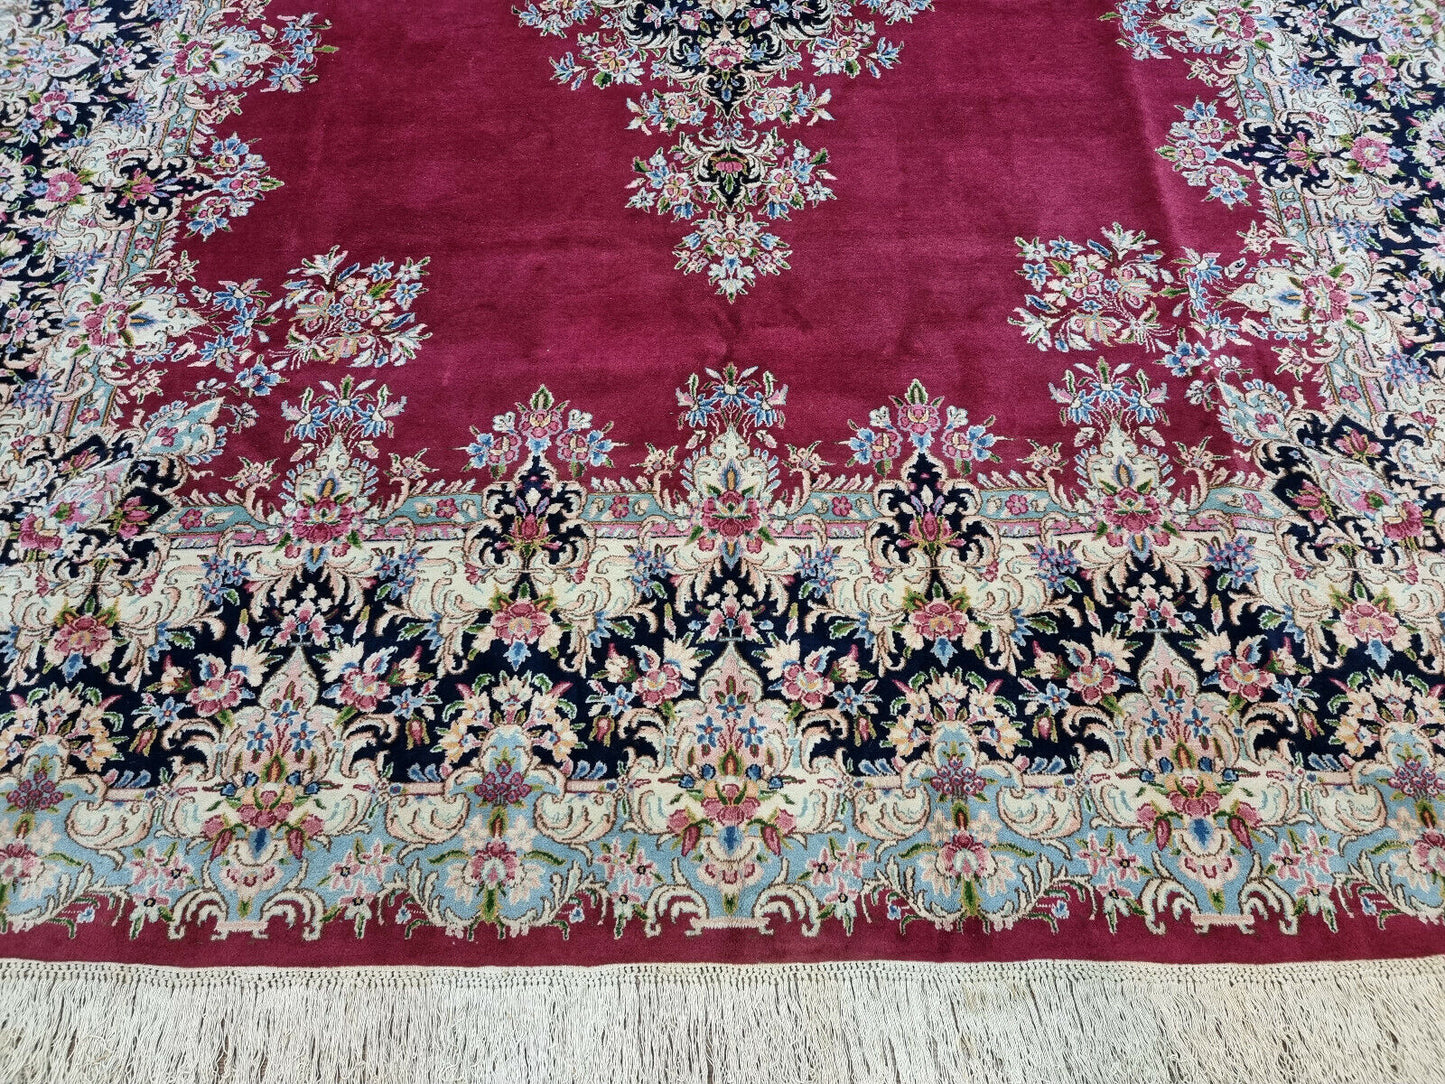 Close-up of rich deep red tones on Handmade Vintage Persian Kerman Rug - Detailed view showcasing the rich and deep red color palette of the rug.